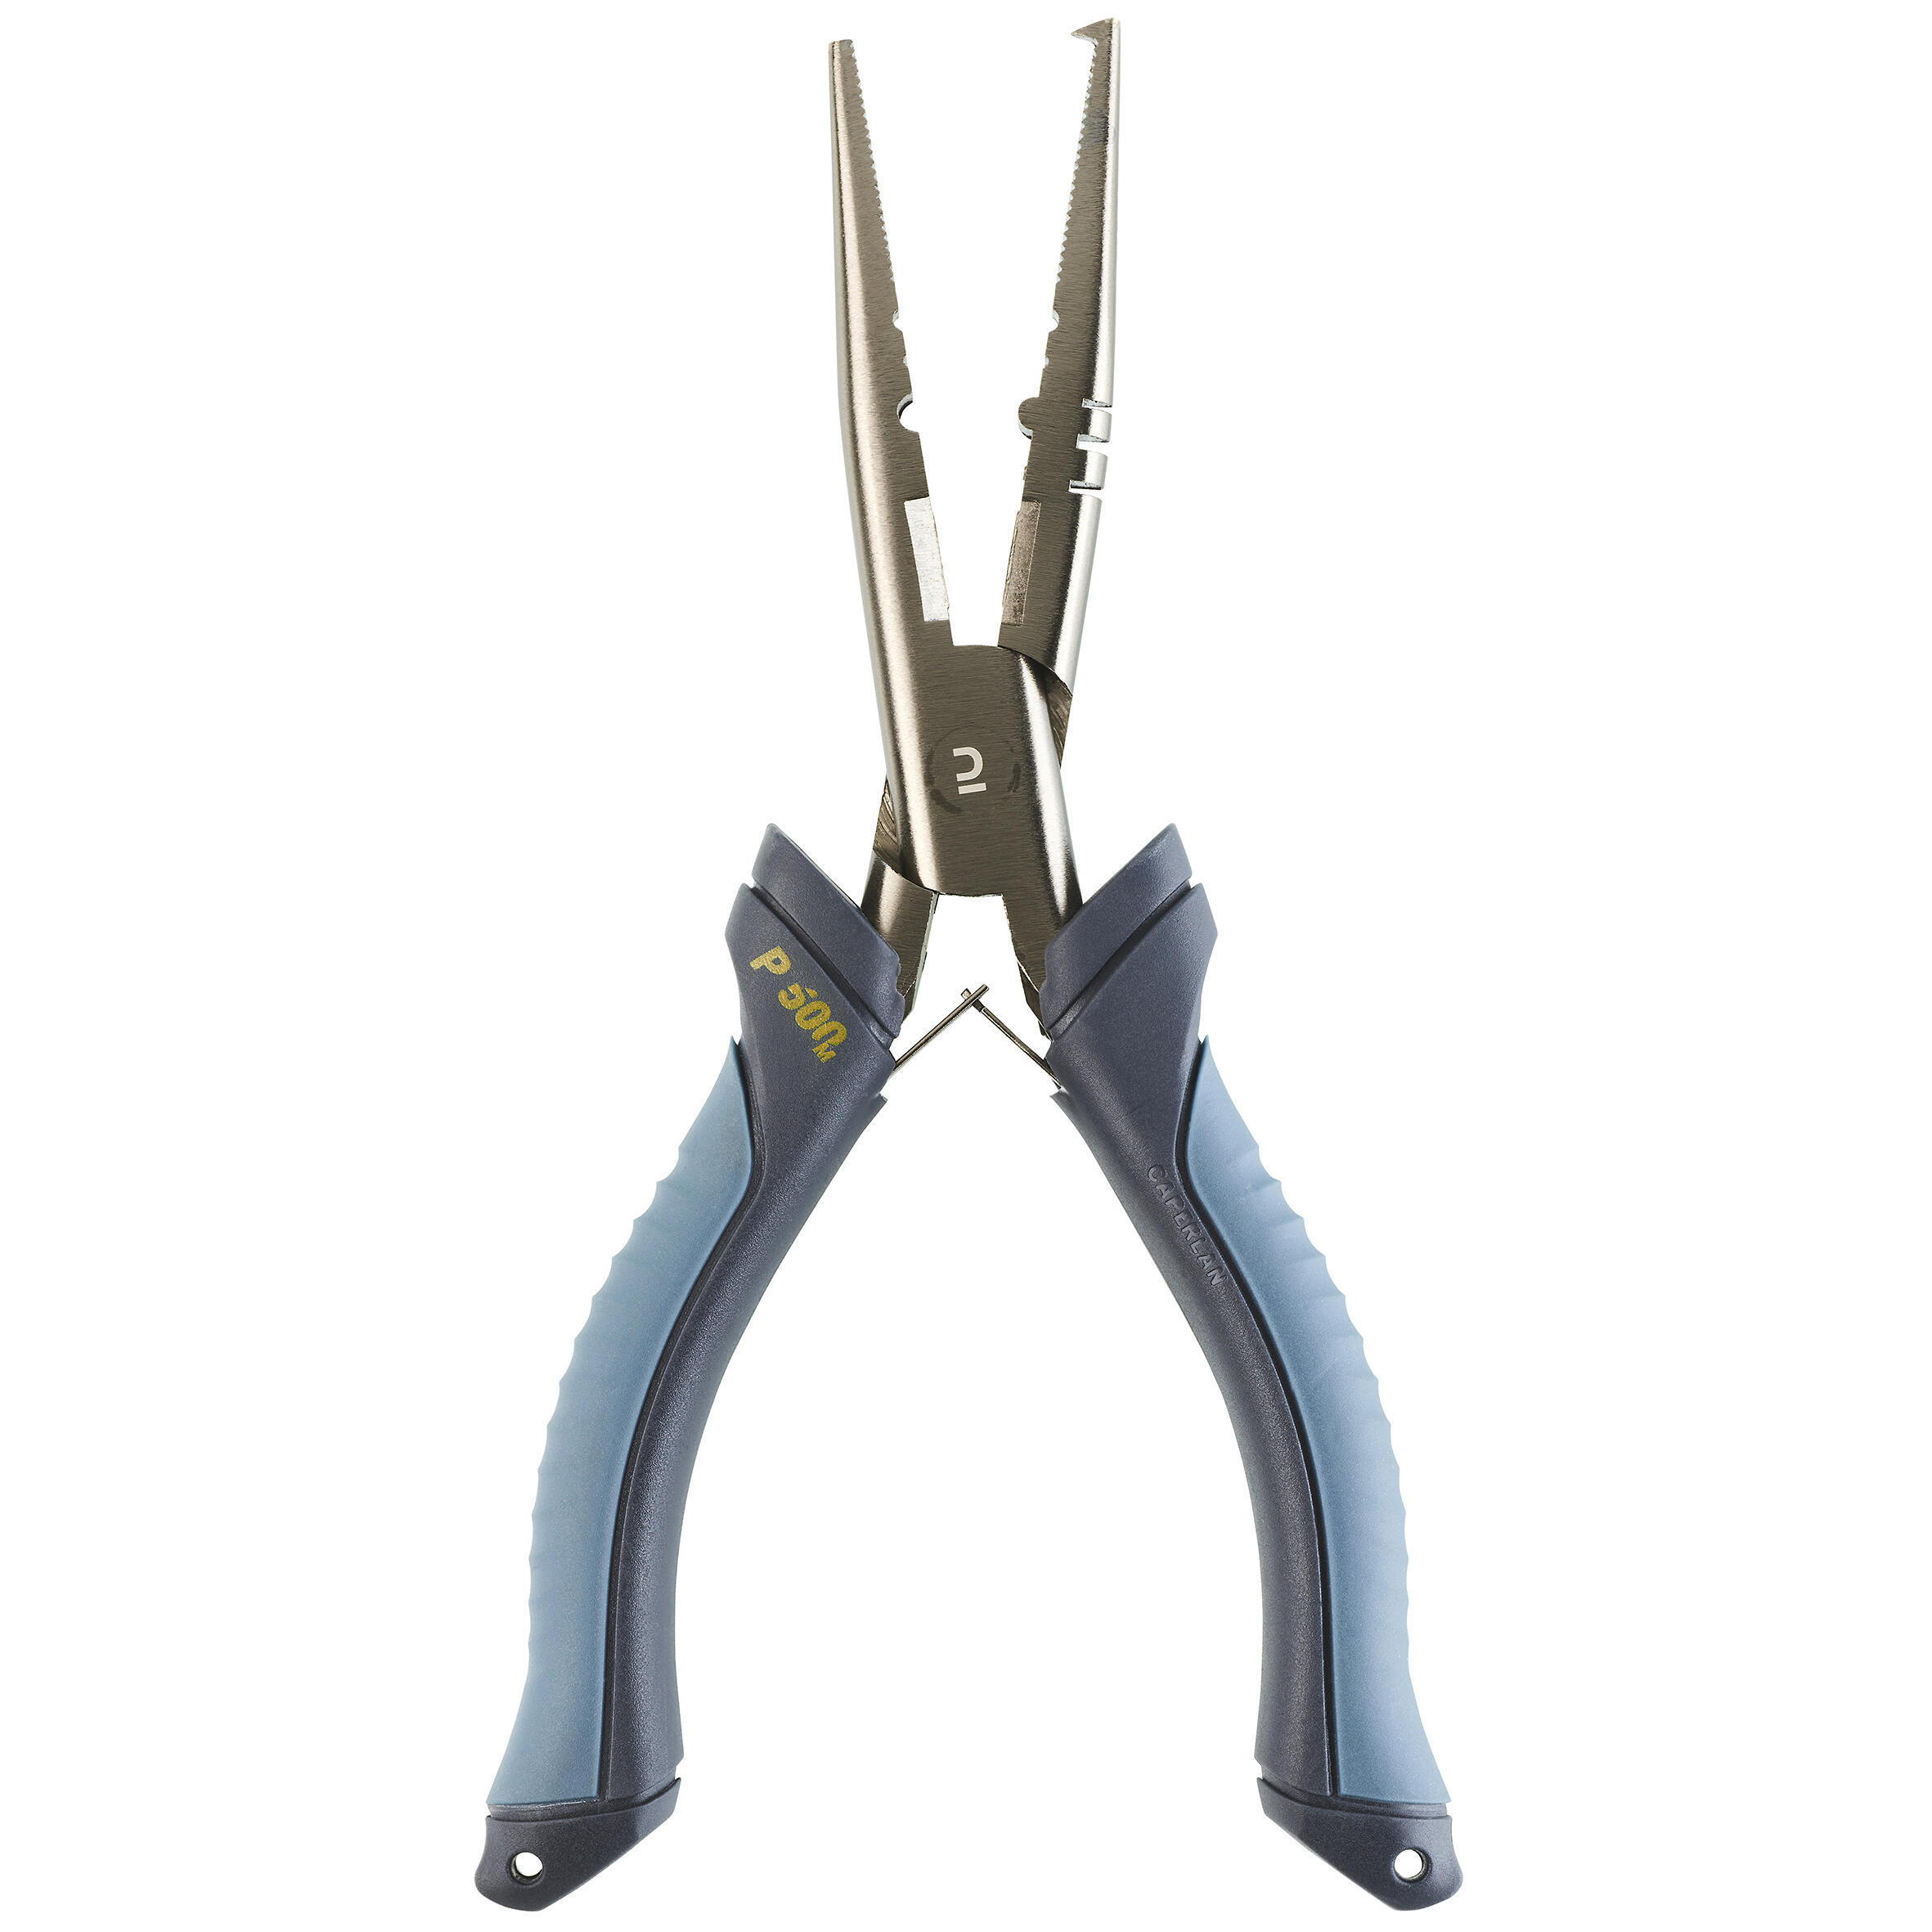 Caperlan Fishing Pliers P-500 M - One Size